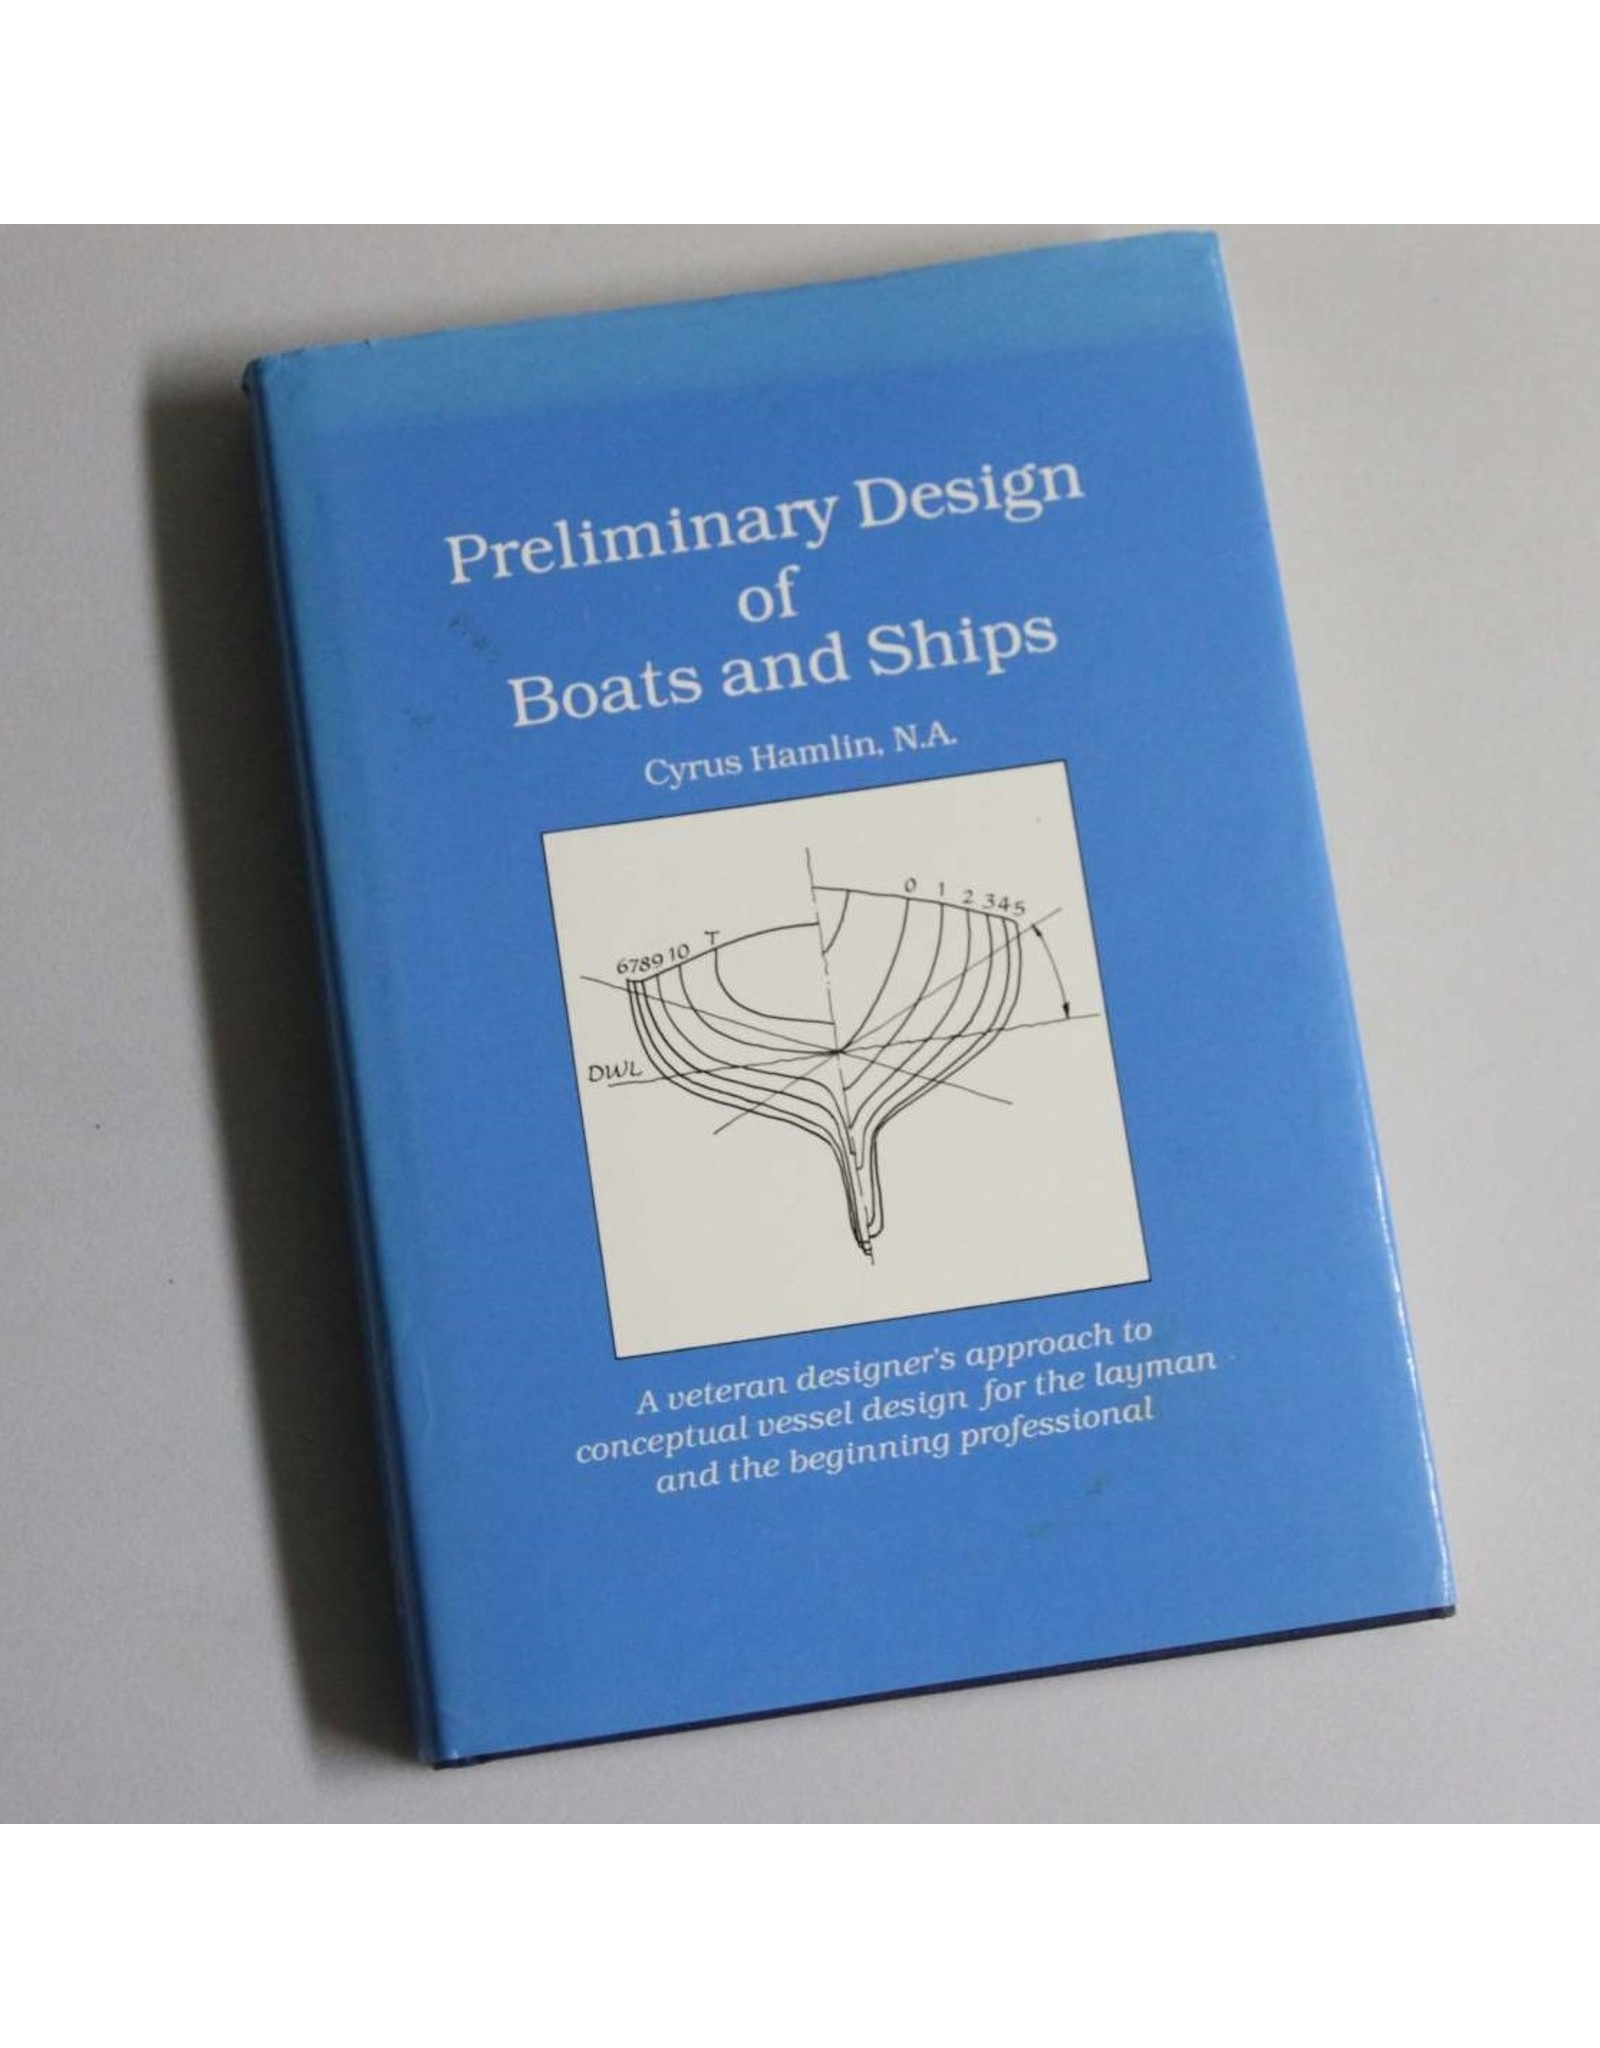 Hardcover book - Preliminary Design of Boats and Ships by Cyrus Hamlin, N.A.